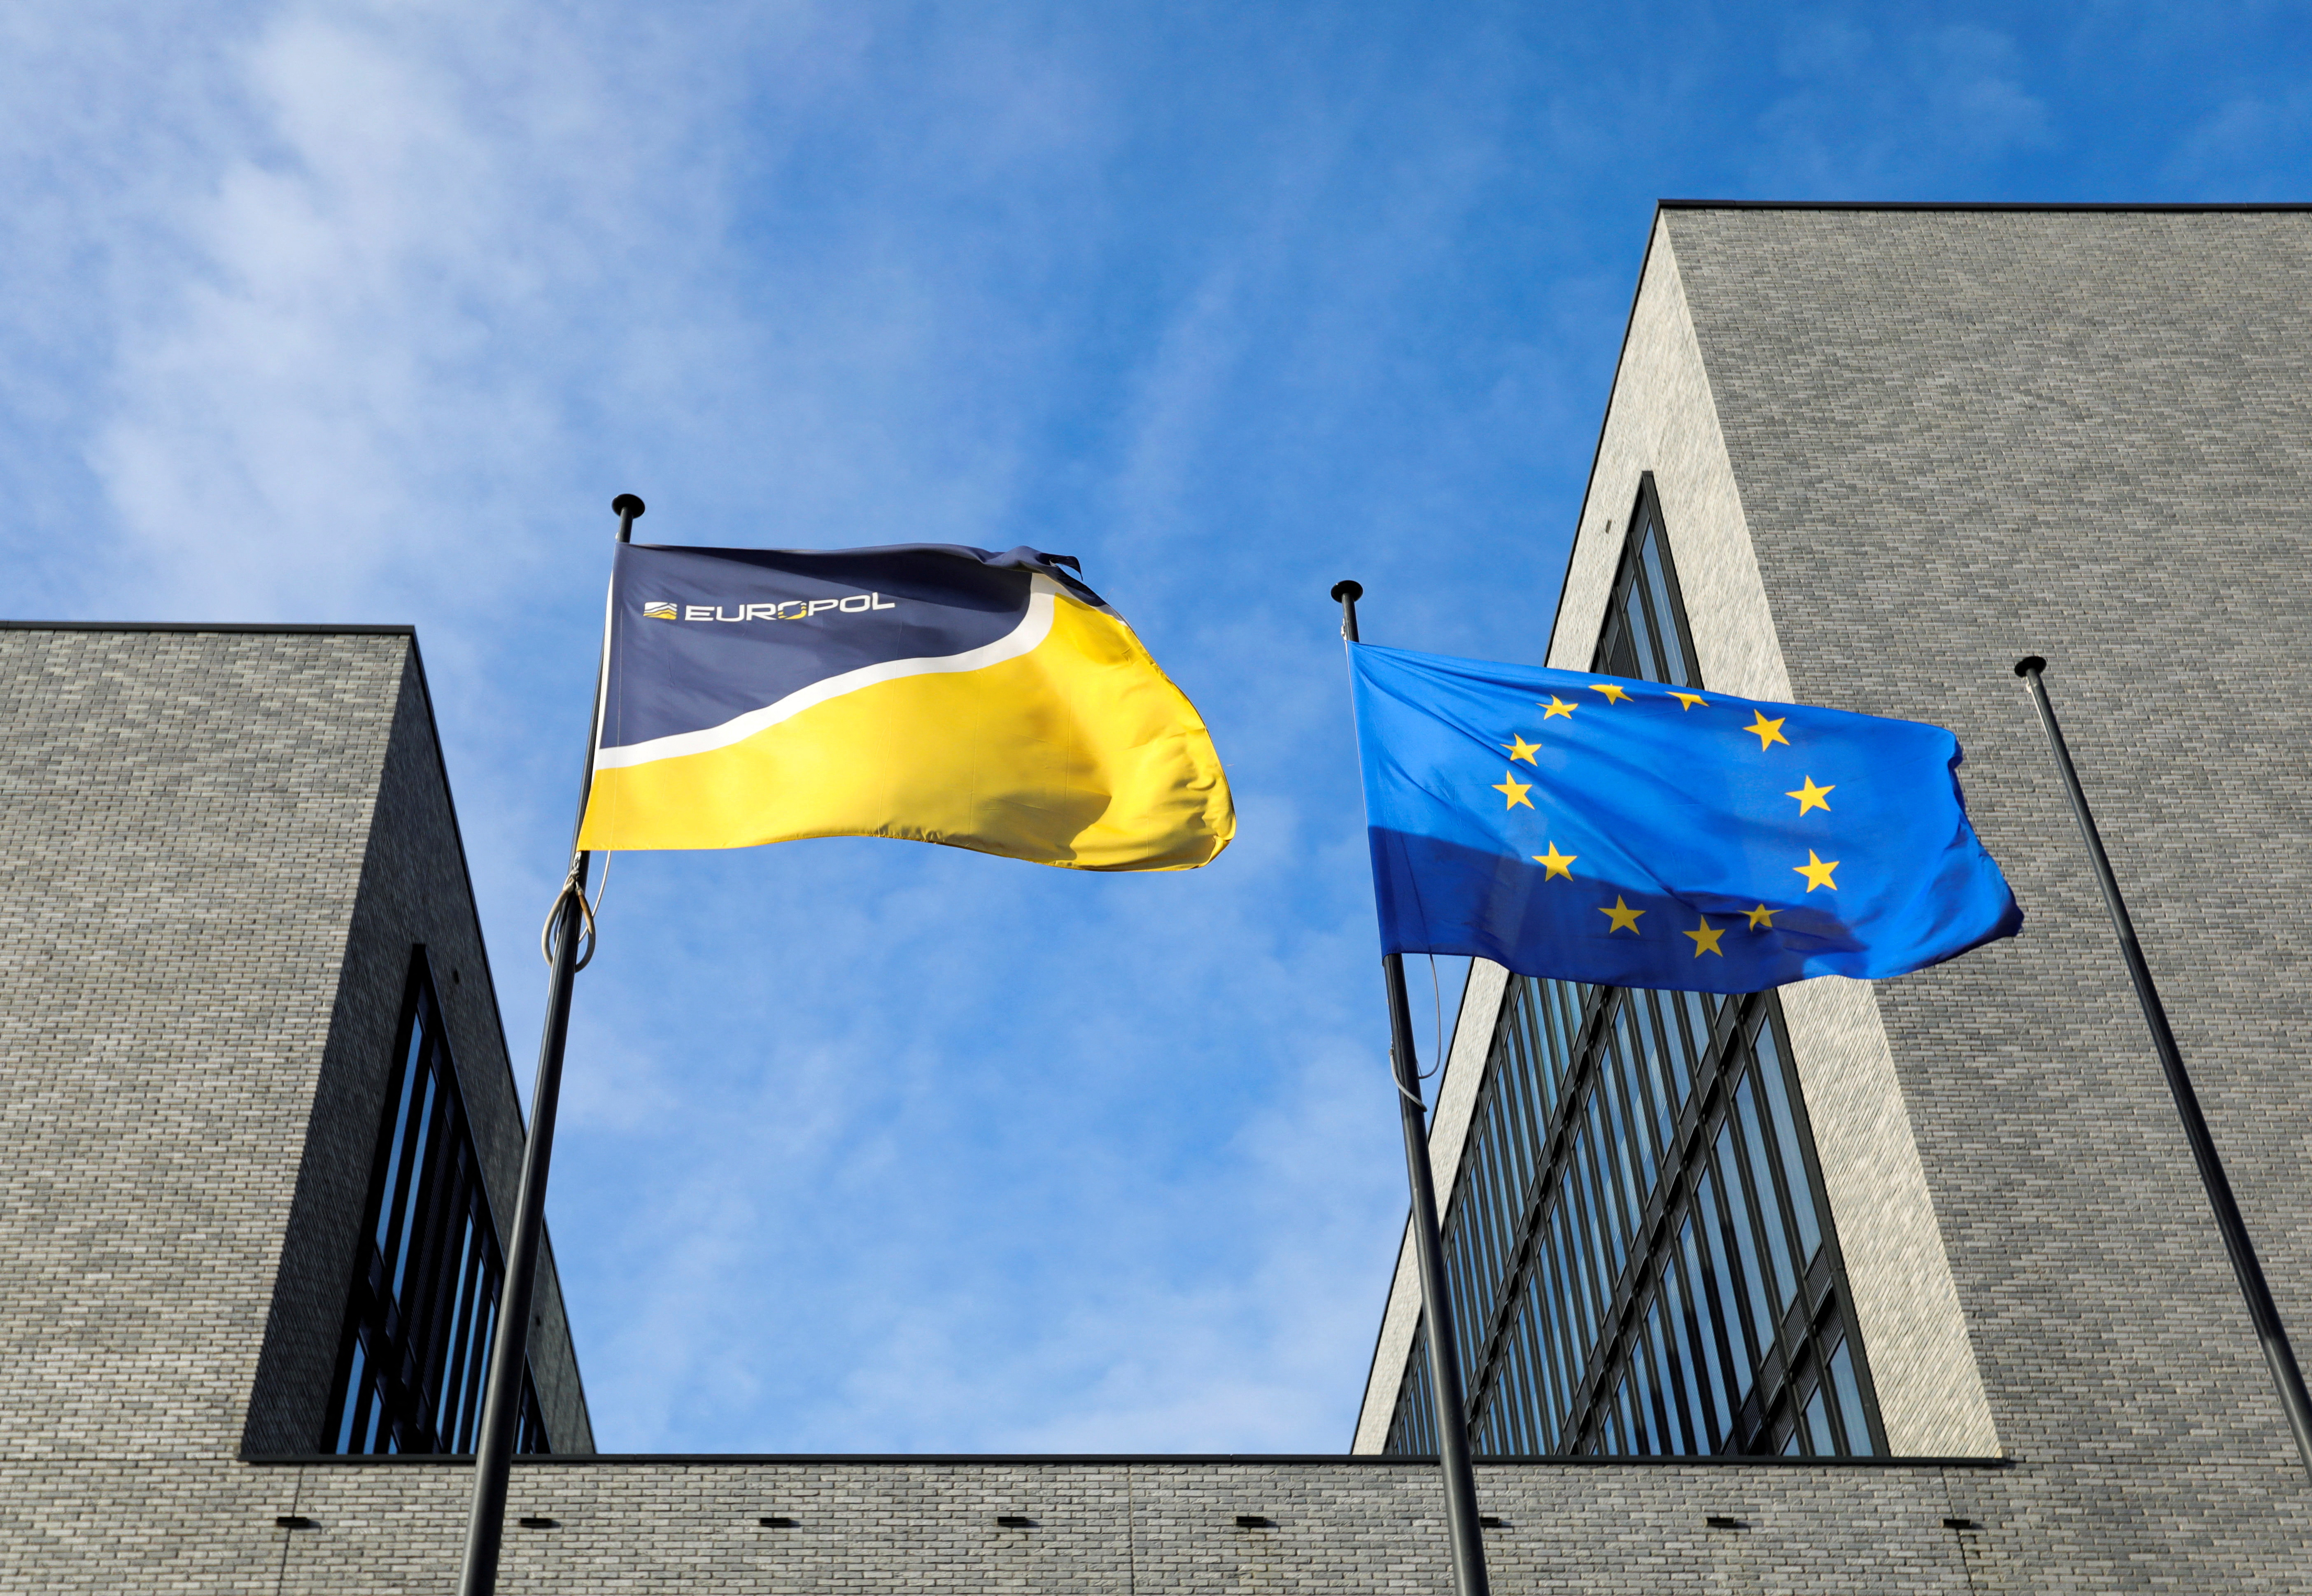 Flags flutter in front of the Europol building in The Hague